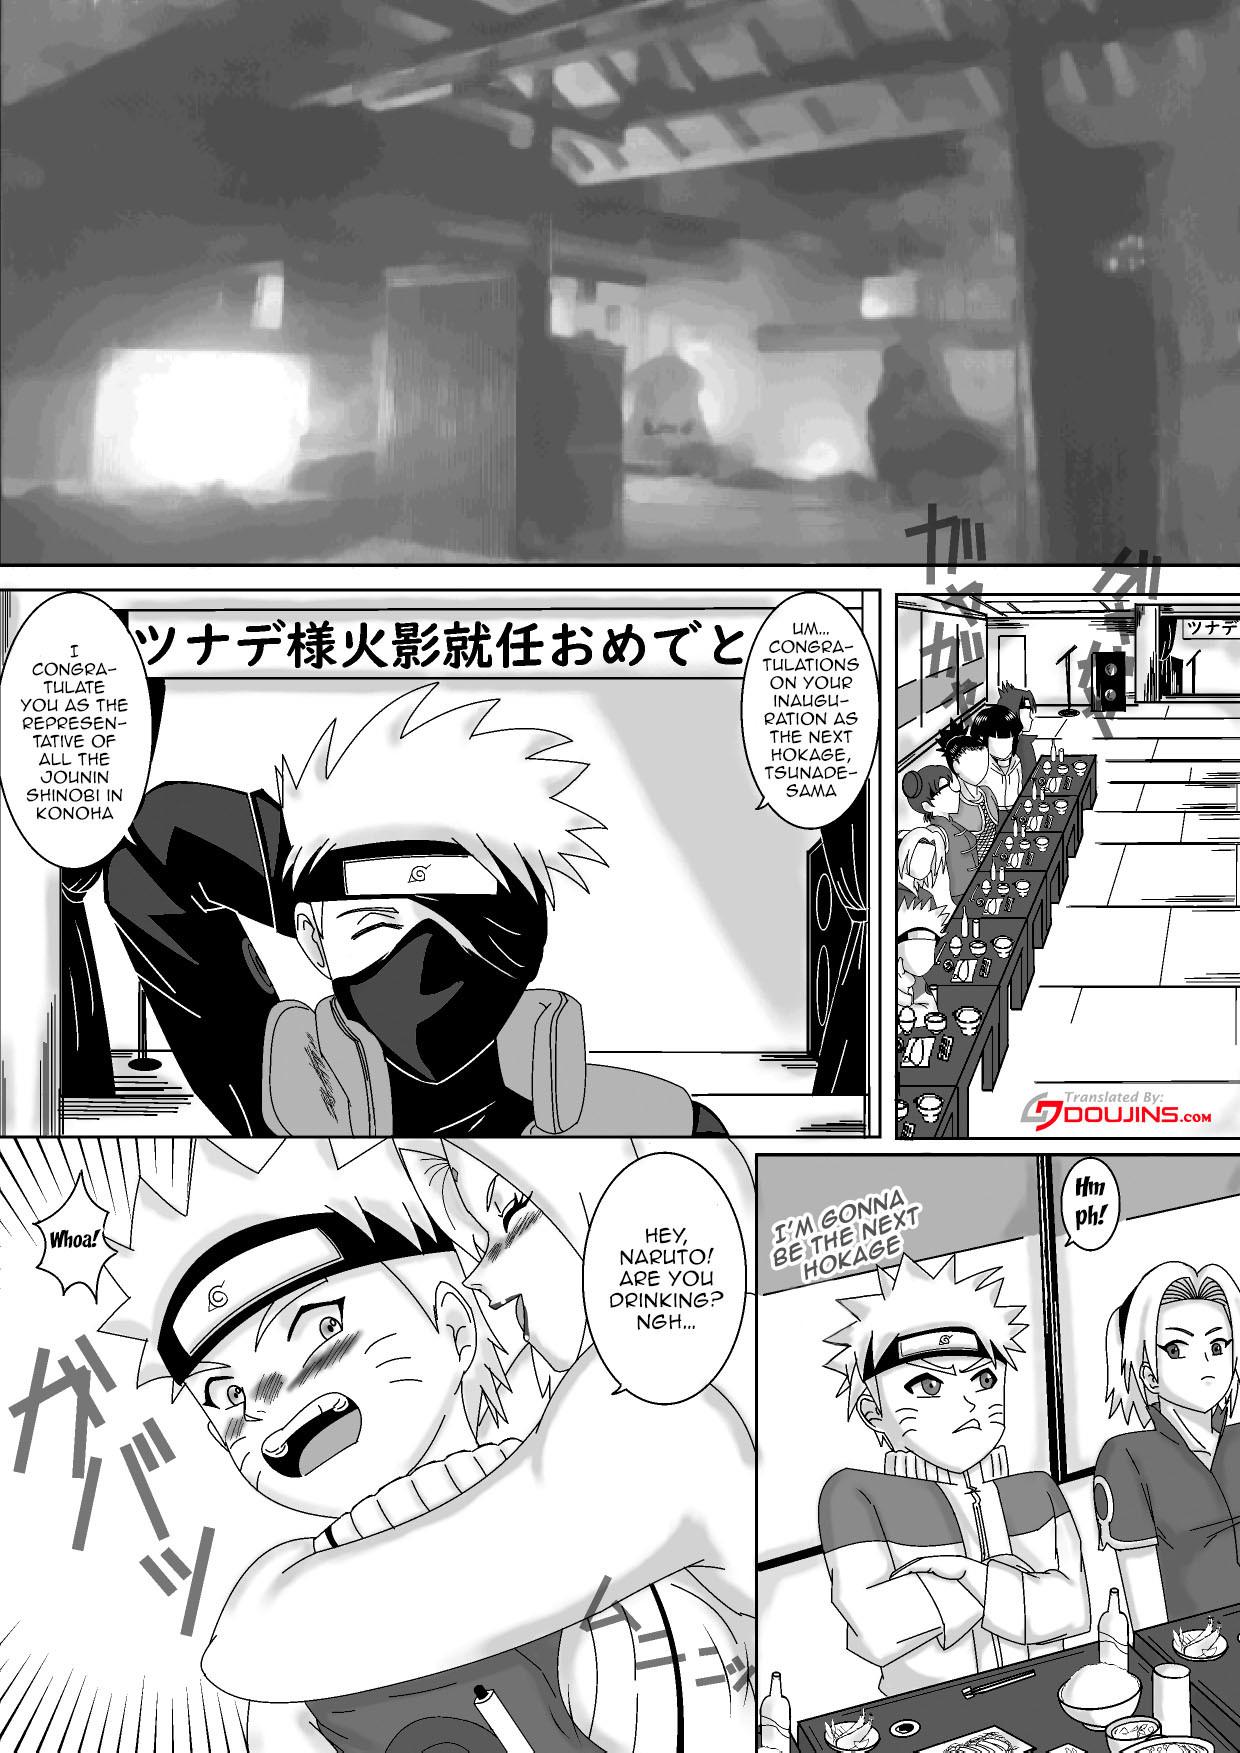 And Nomisugite Deisui Shita BBA to Yarimakutta Ken!! | The Case Of Having Sex With This Old Lady After She Got Herself Really Drunk - Naruto Moms - Page 2